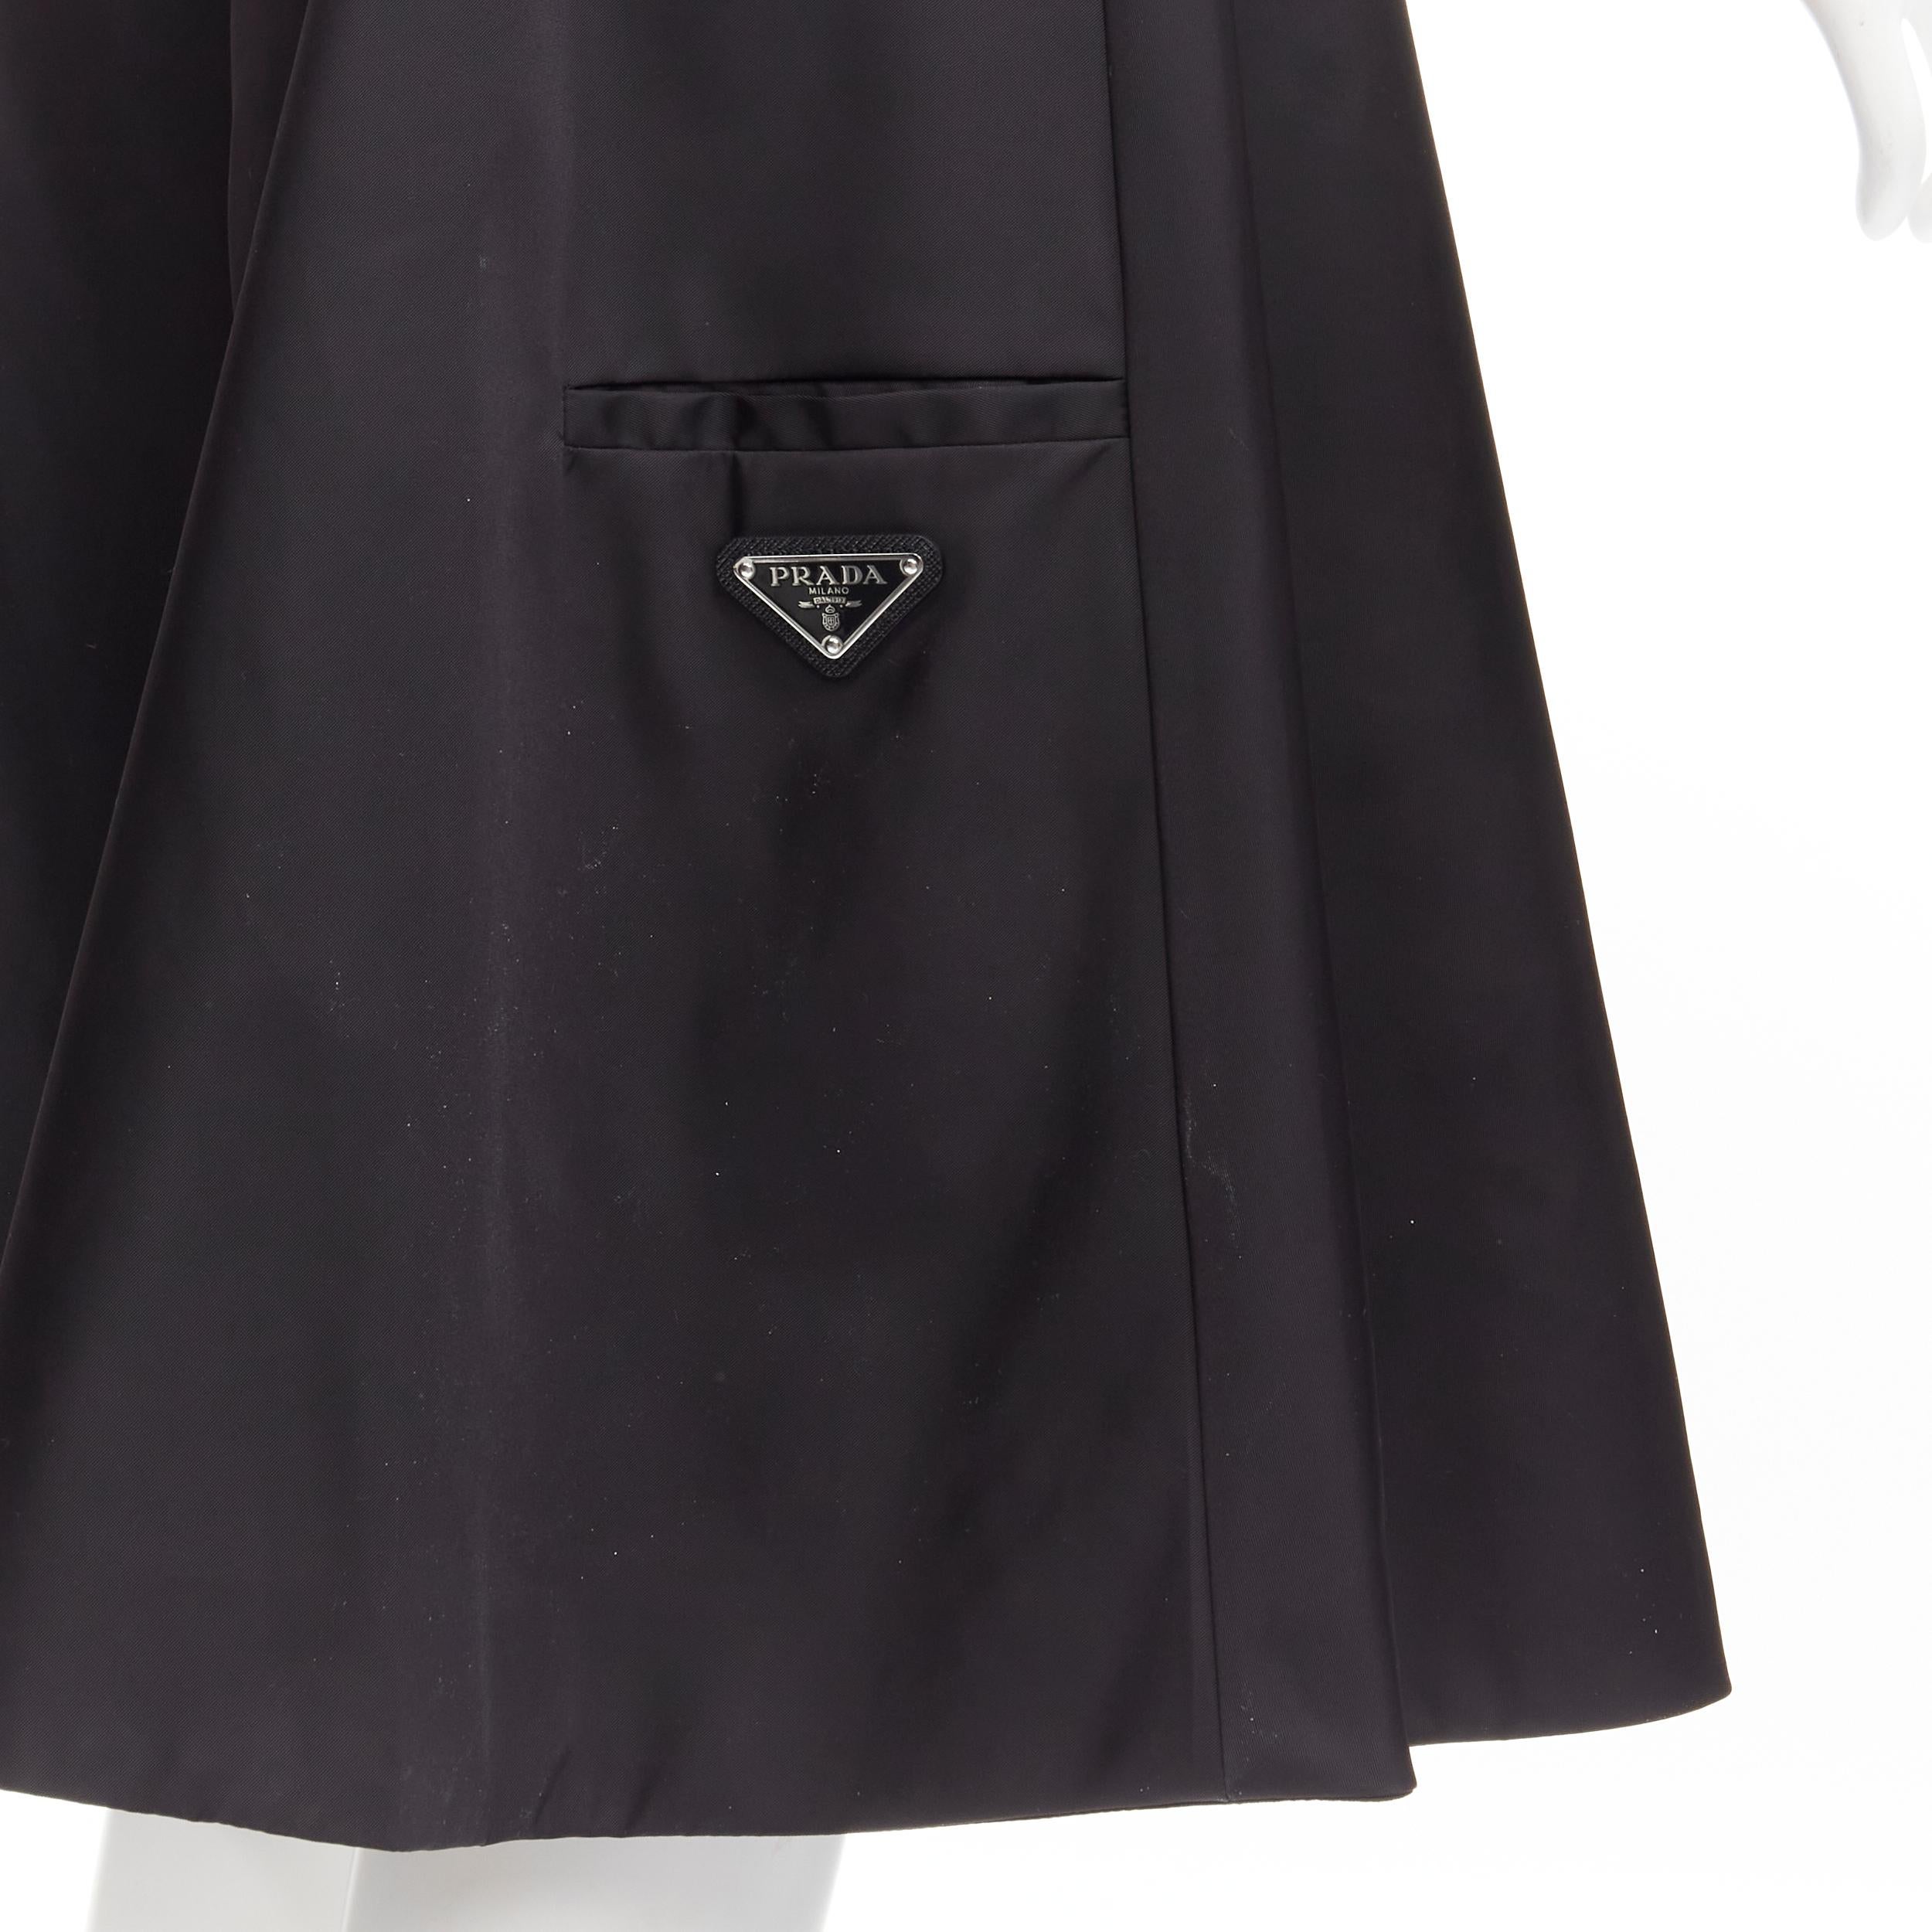 new PRADA 2019 black triangle logo seal plaque A-line flared skirt IT38 XS 
Reference: MELK/A00062 
Brand: Prada 
Collection: 2019 
Material: Nylon 
Color: Black 
Pattern: Solid 
Closure: Zip 
Made in: Romania 

CONDITION: 
Condition: New without